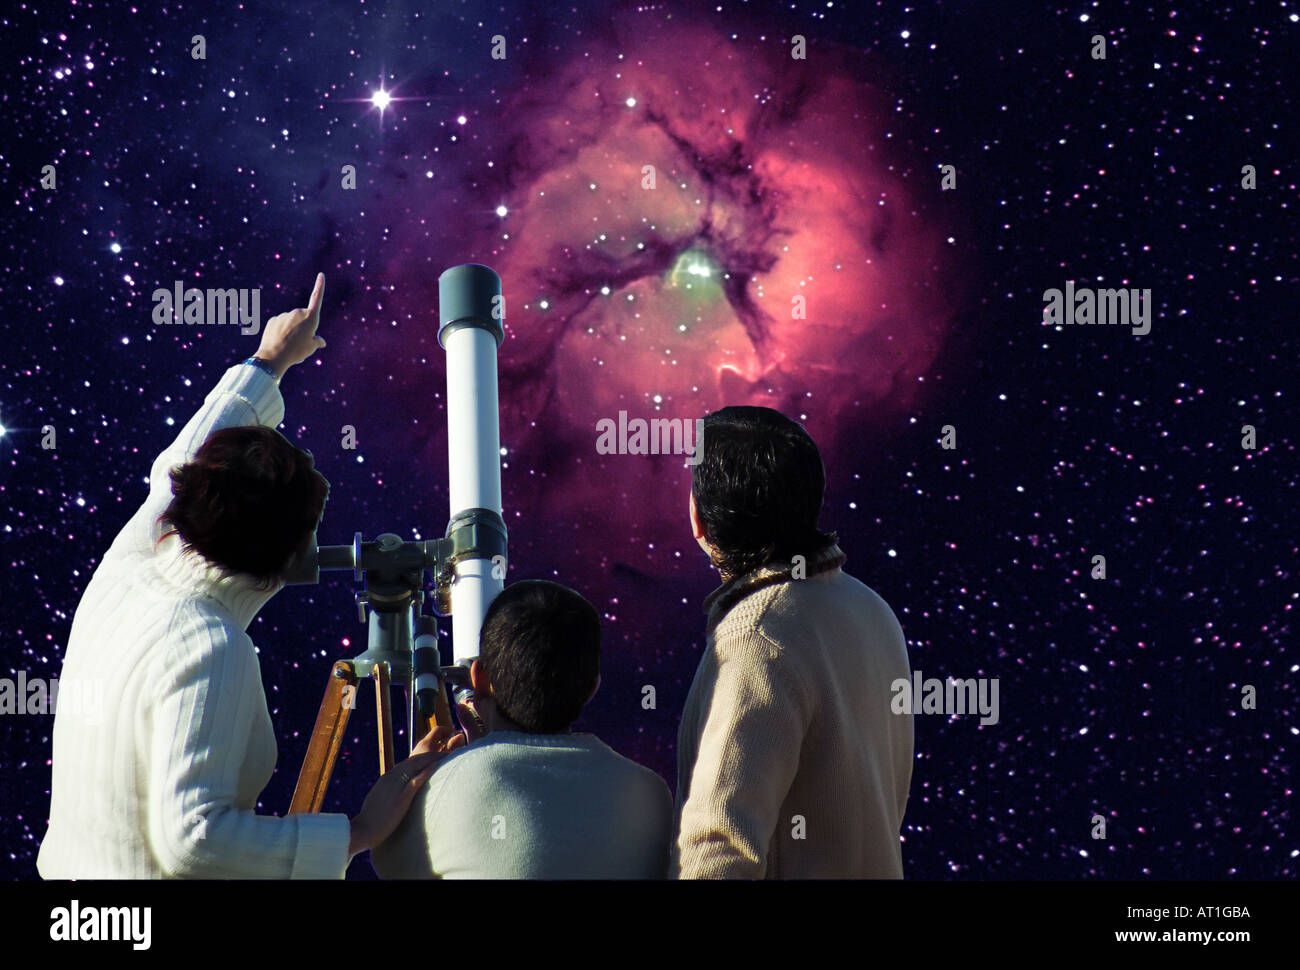 Family watching the universe with telescope Stock Photo